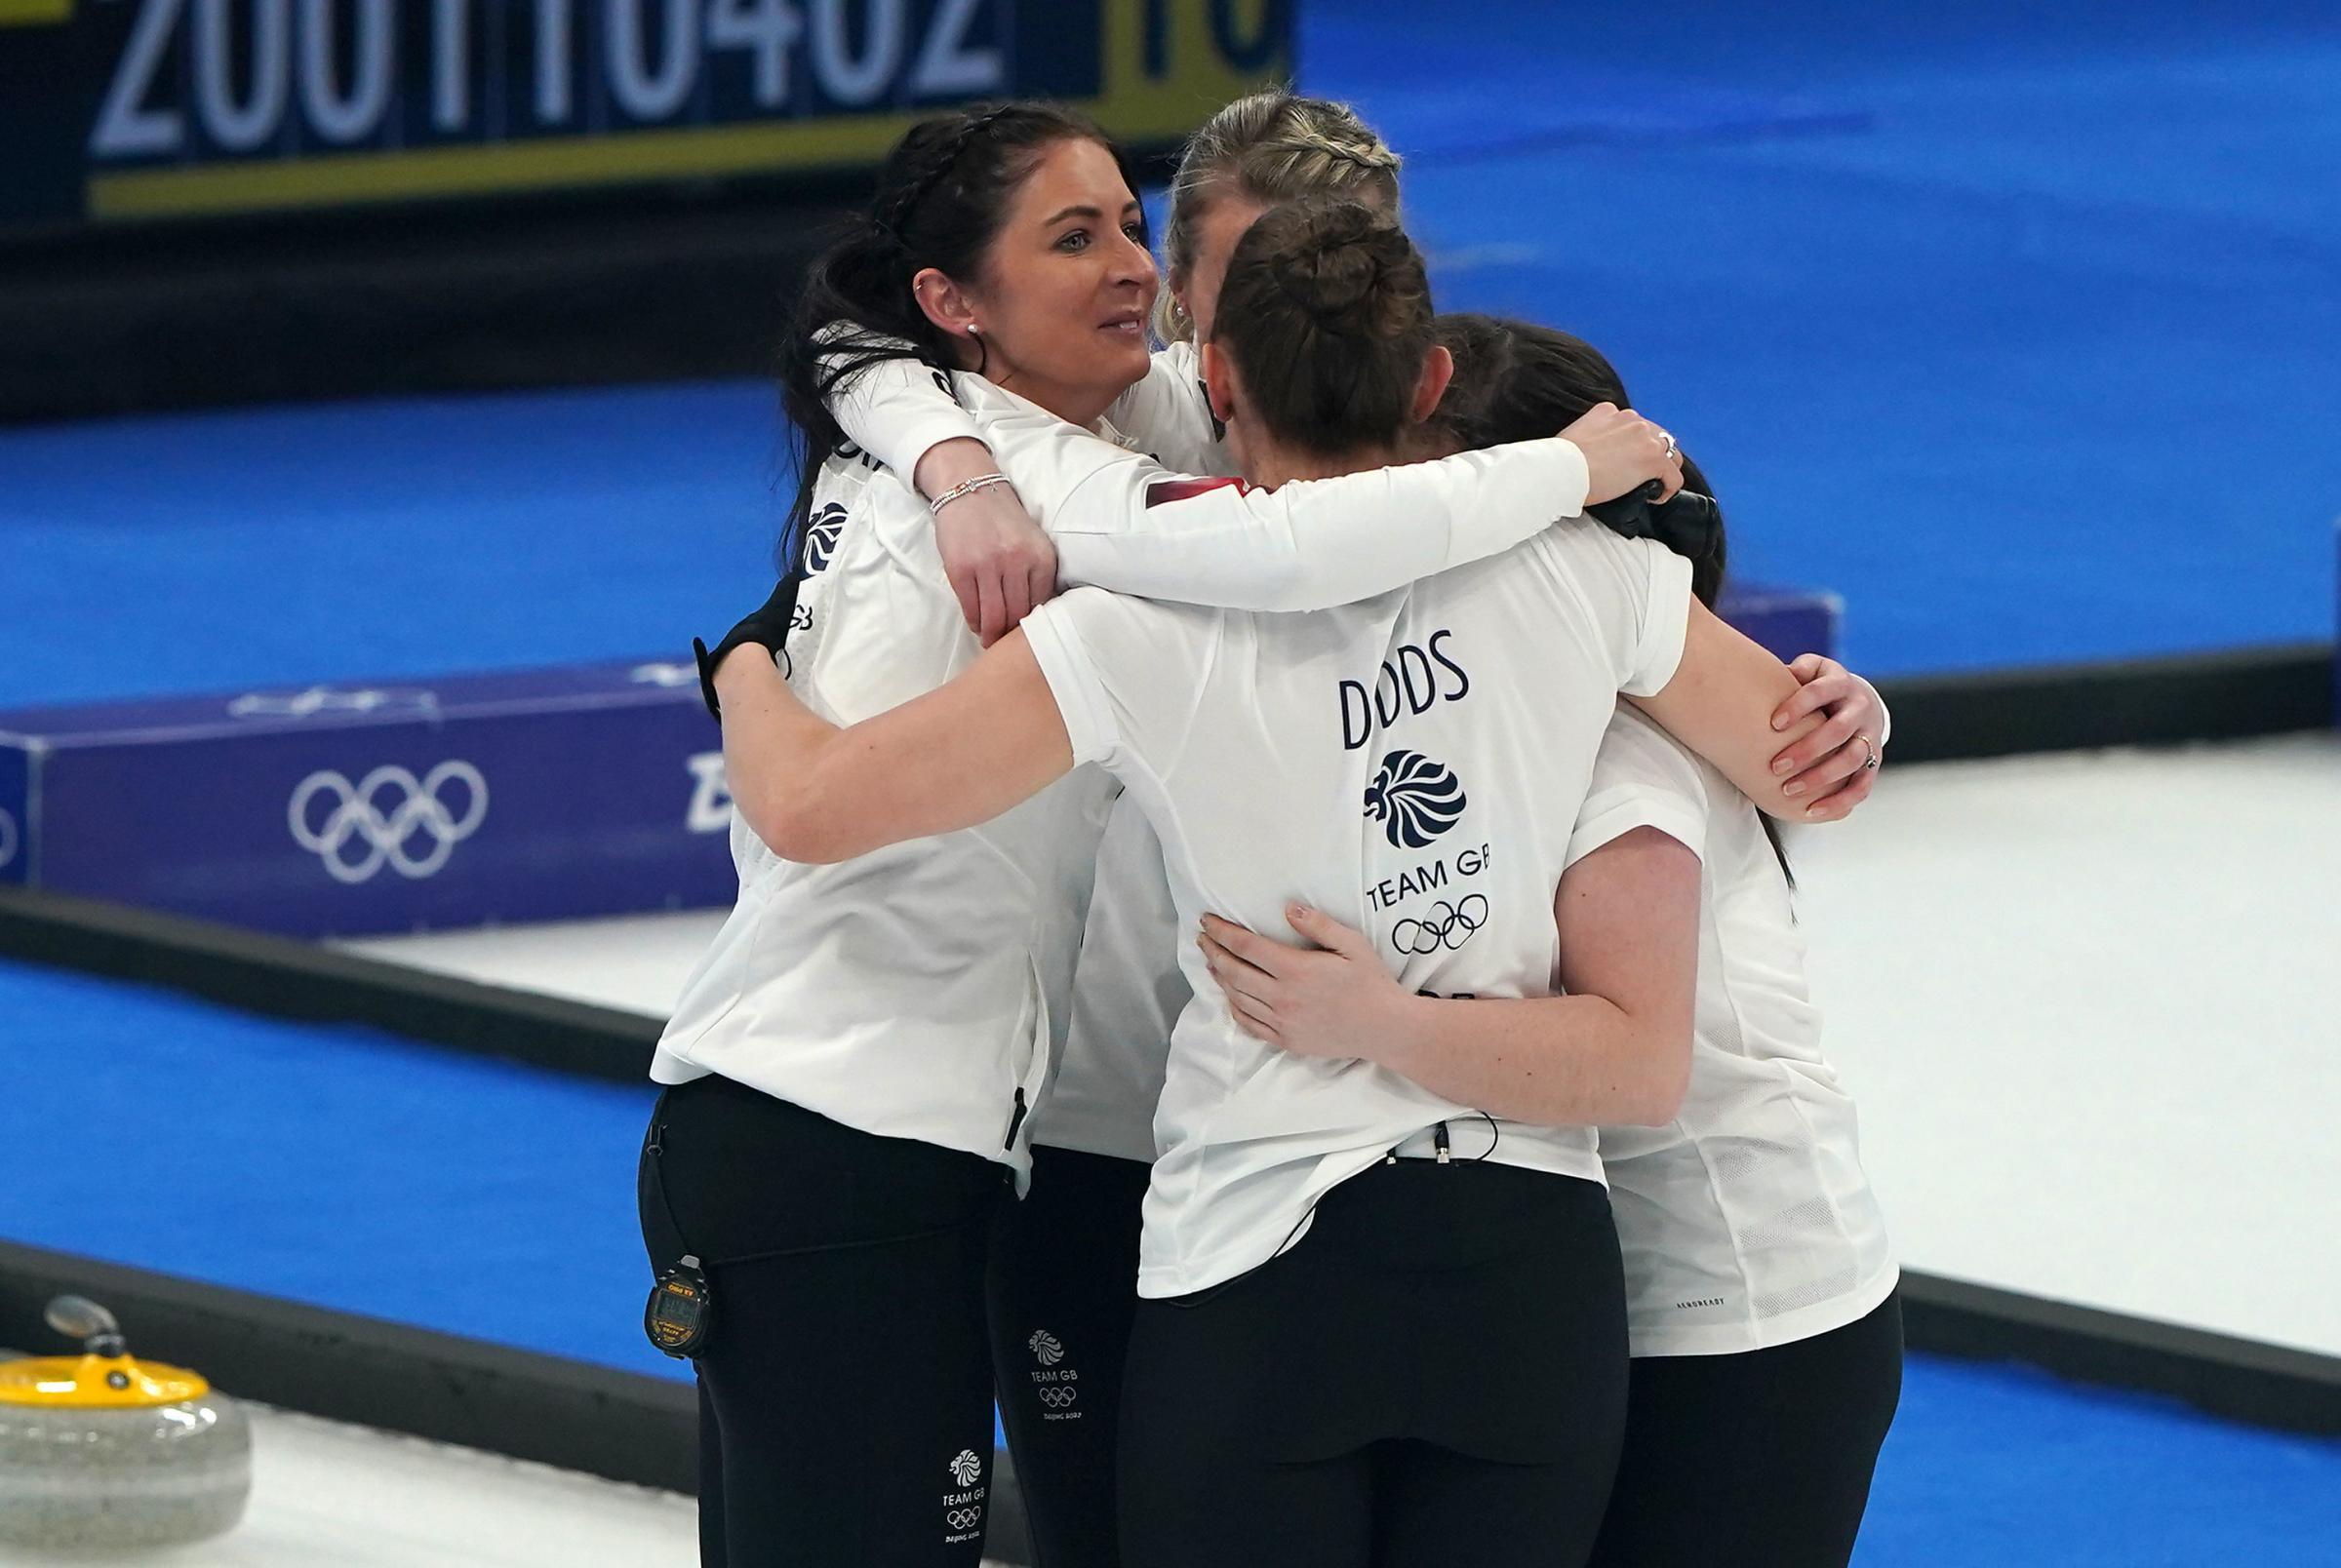 Great Britains Eve Muirhead, Vicky Wright, Hailey Duff and Jennifer Dodds celebrates winning gold in the Womens Gold Medal Game.